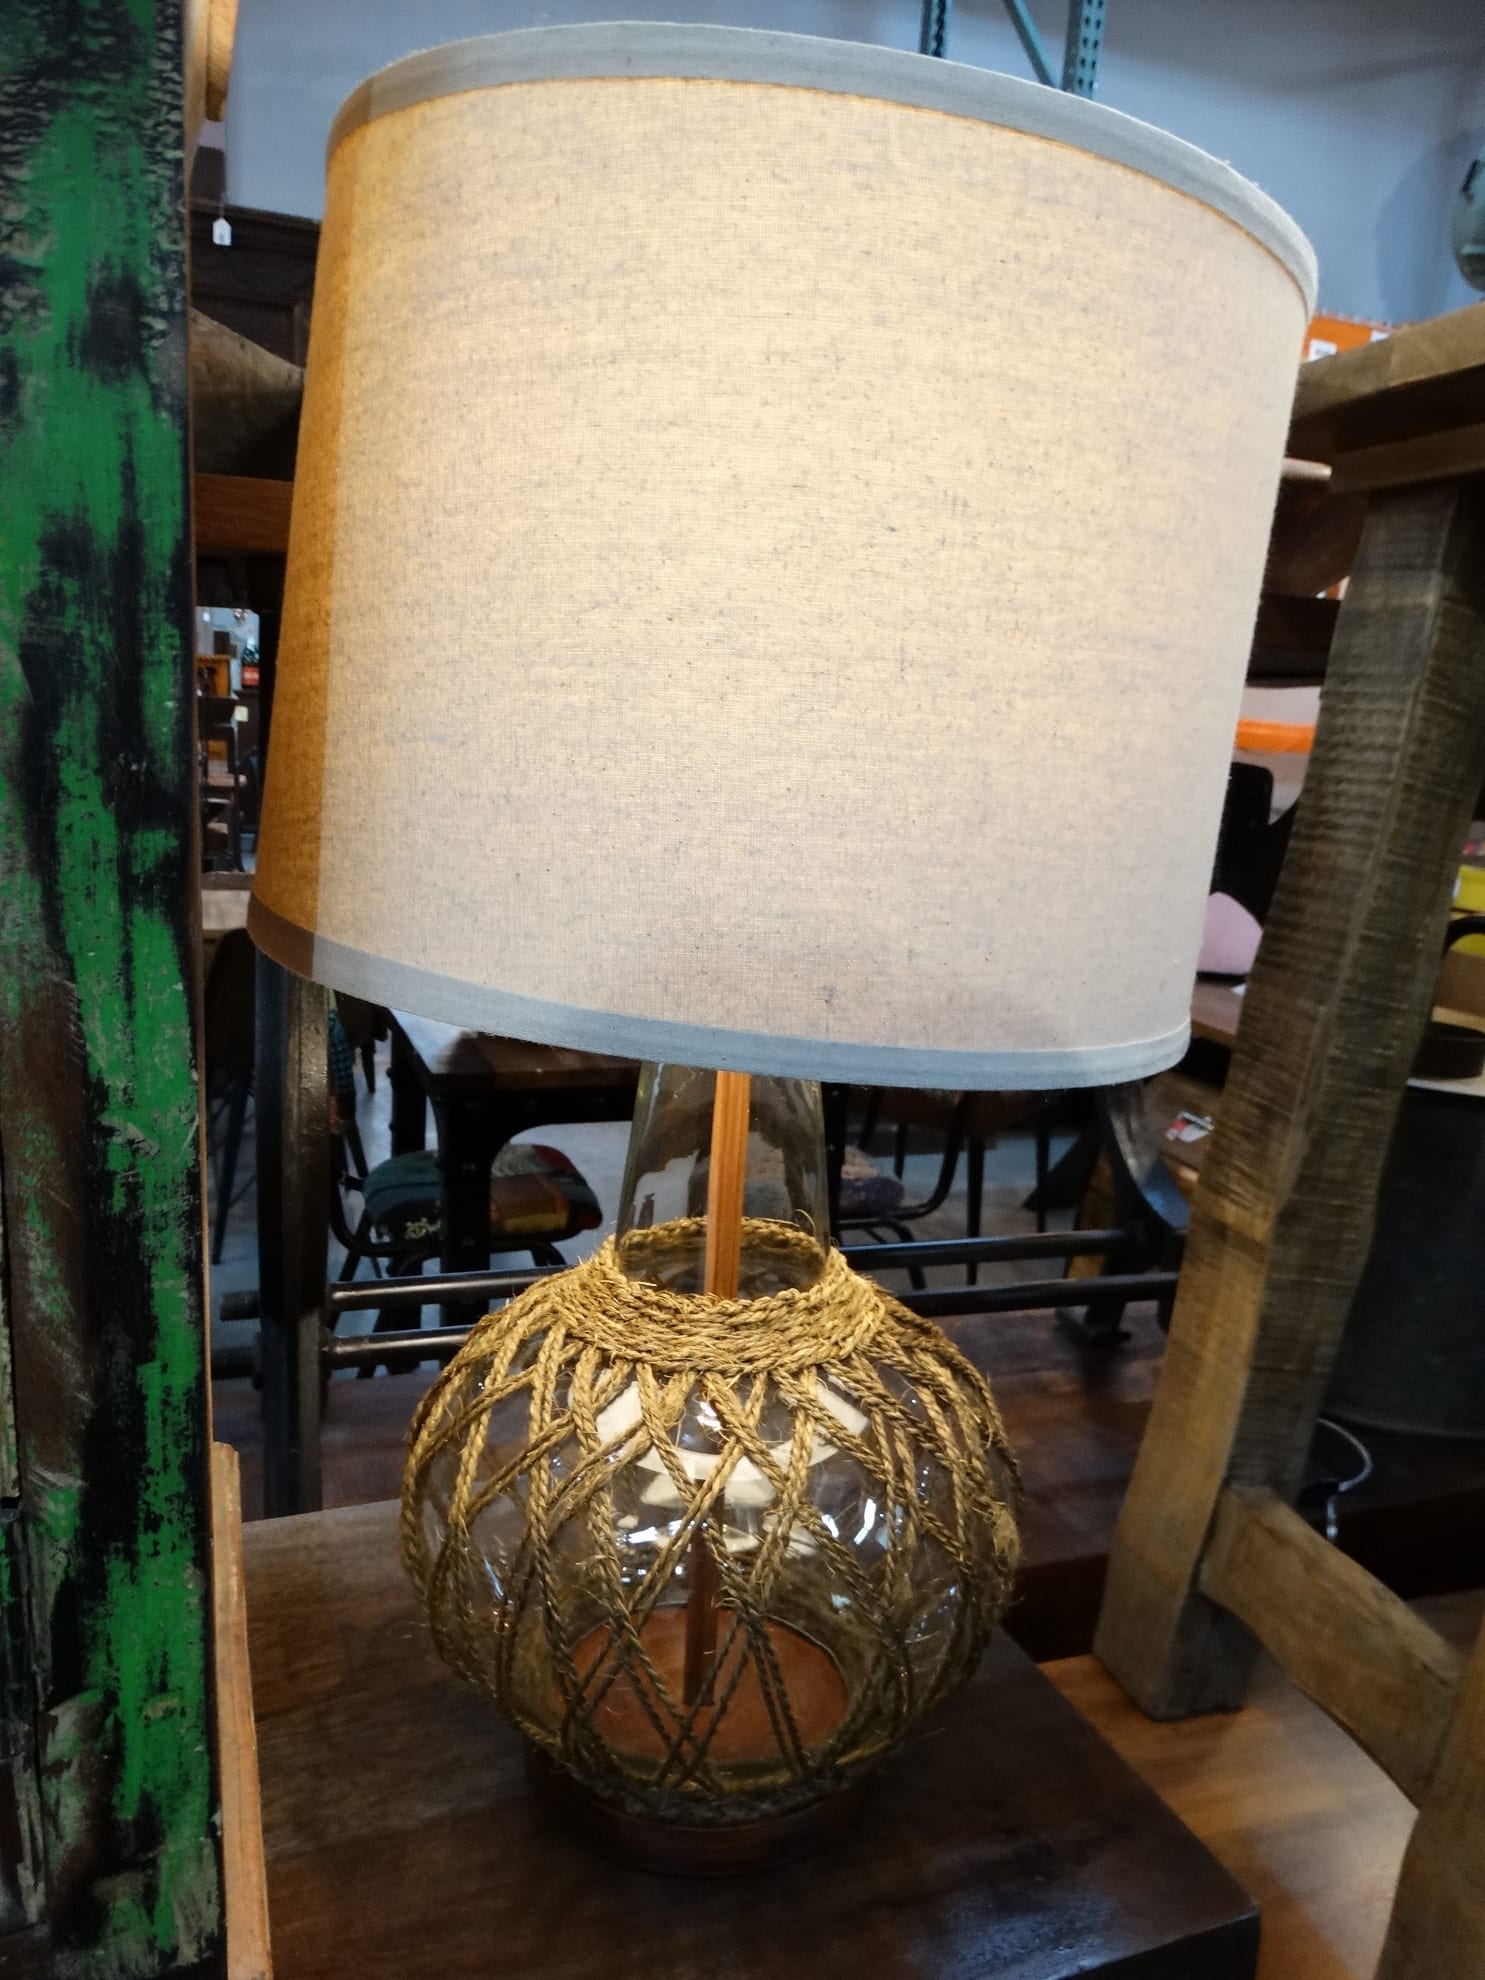 Decorative Ball Table Lamp The macrame weave makes this ...